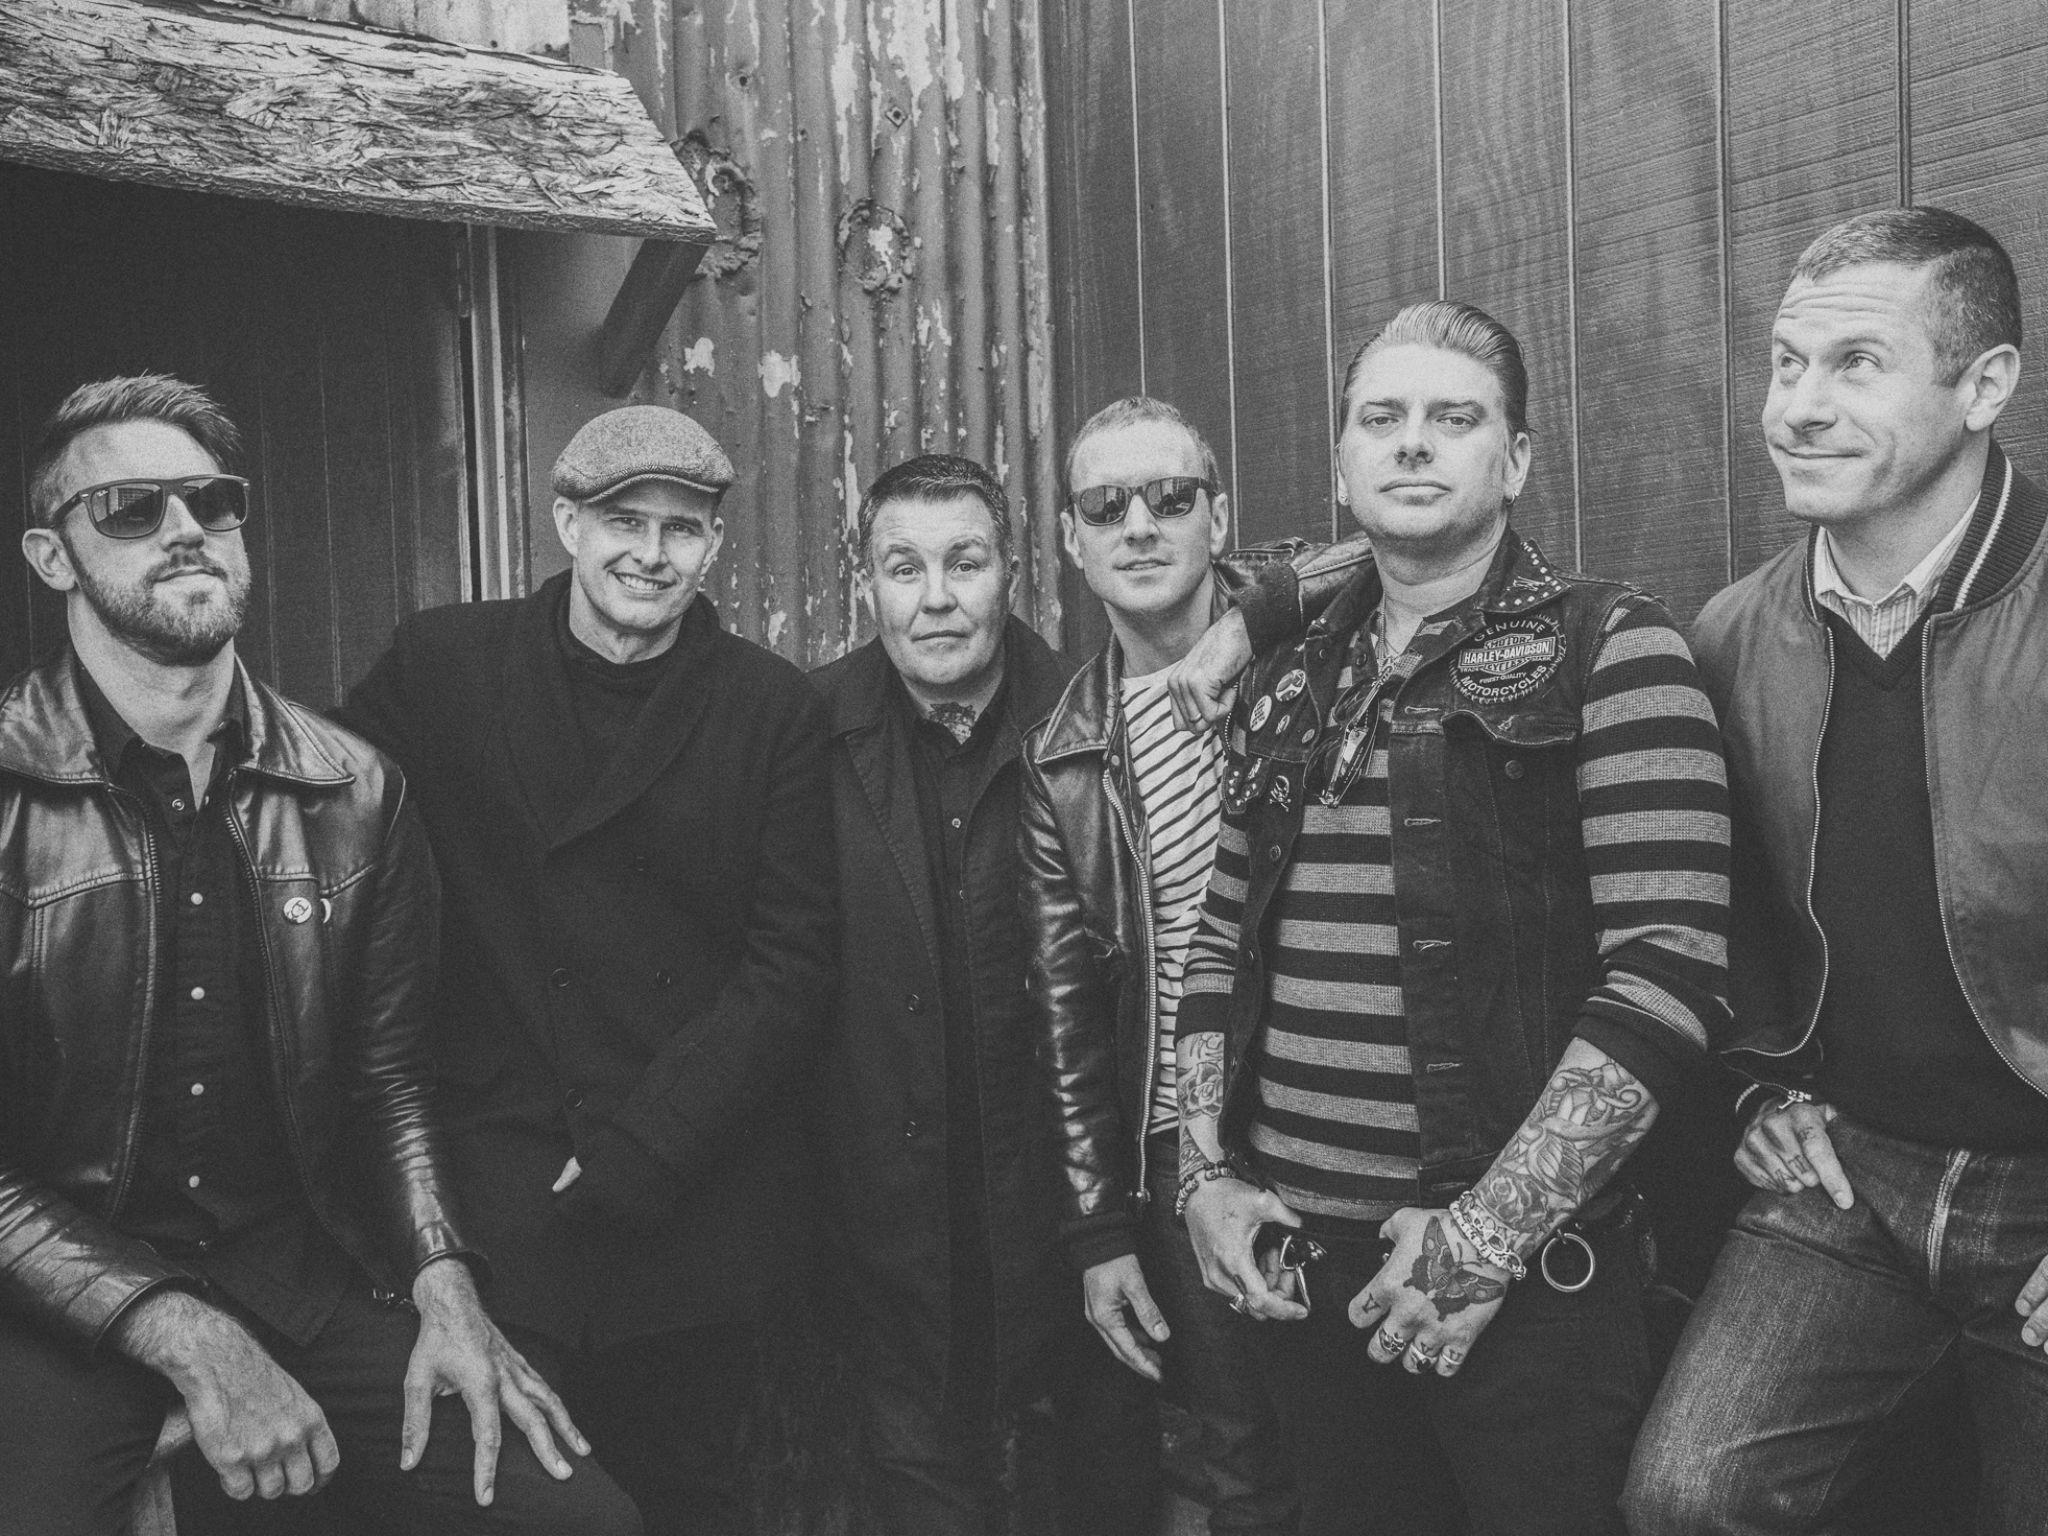 scaring Optage Stavning Dropkick Murphys: 'We aren't doctors, but we can play music and deliver a  message of hope through our songs' | The Independent | The Independent